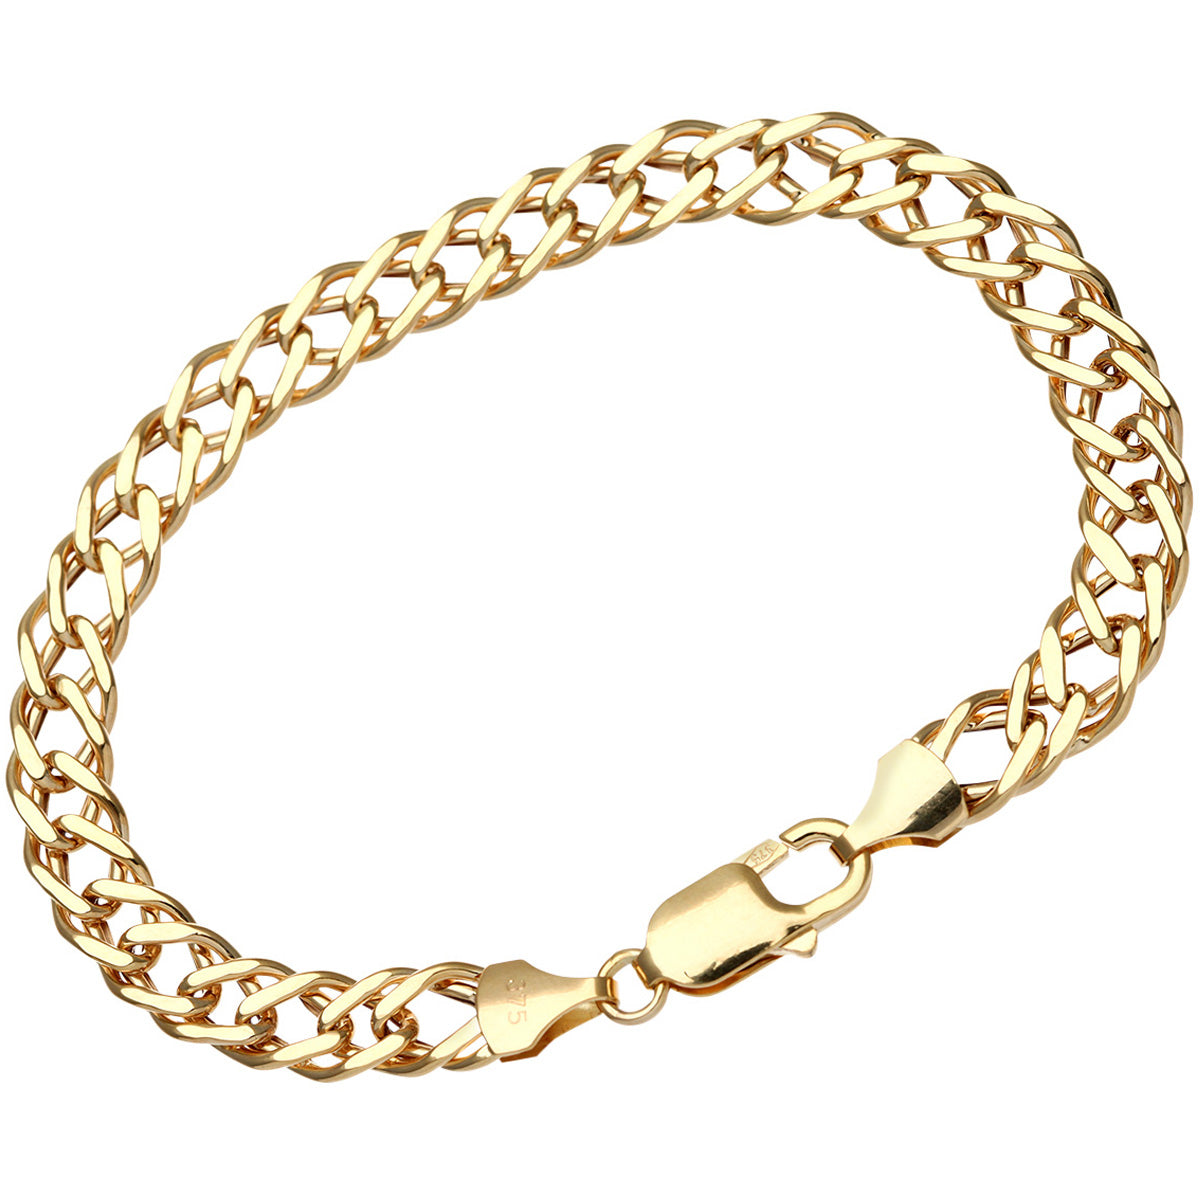 9ct Yellow Gold 5.6g Chunky Double Curb Bracelet of 21cm/8.5 Inch Length and 7mm Width